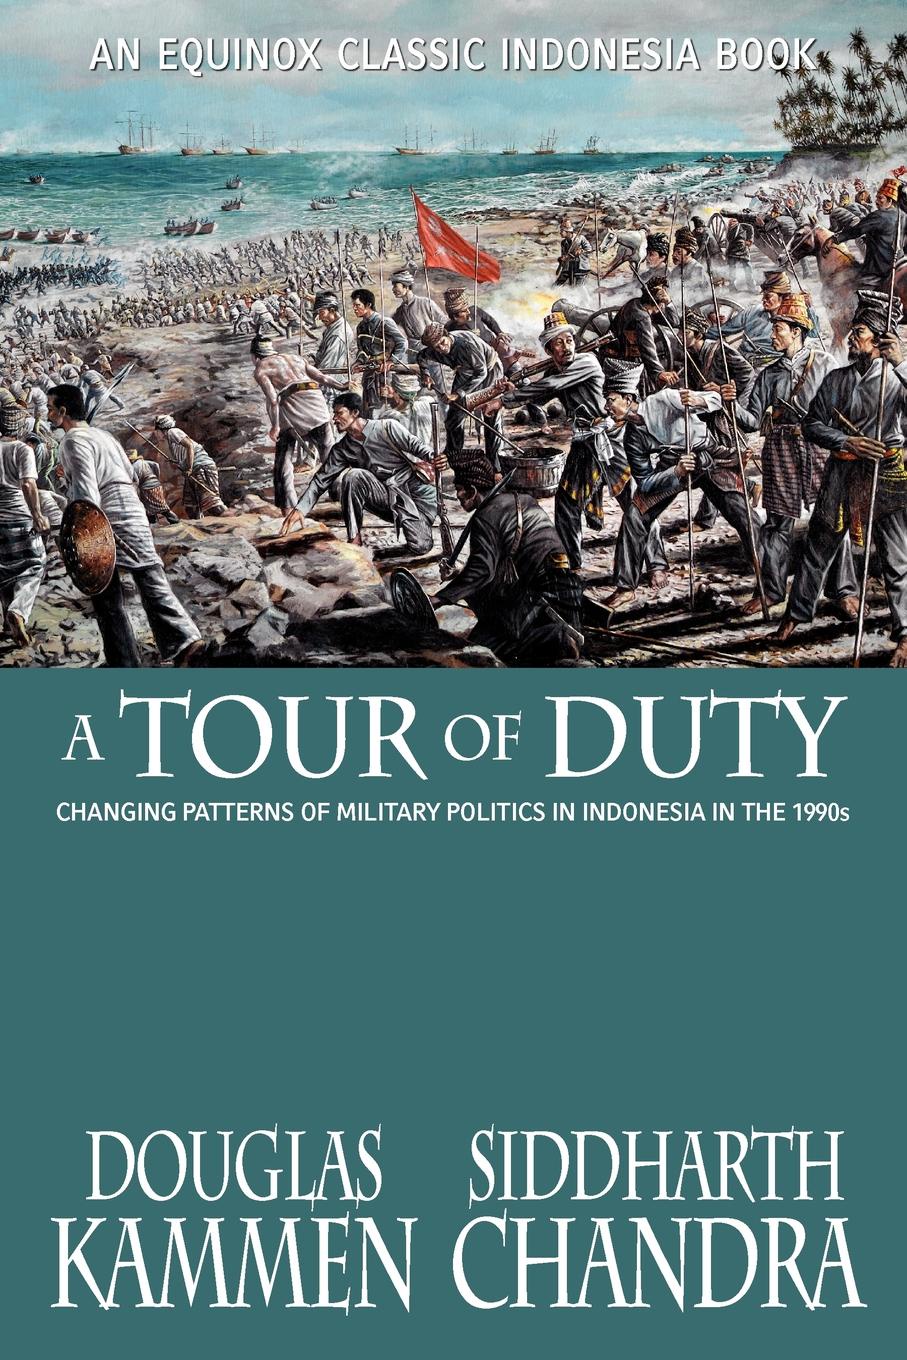 A Tour of Duty. Changing Patterns of Military Politics in Indonesia in the 1990s